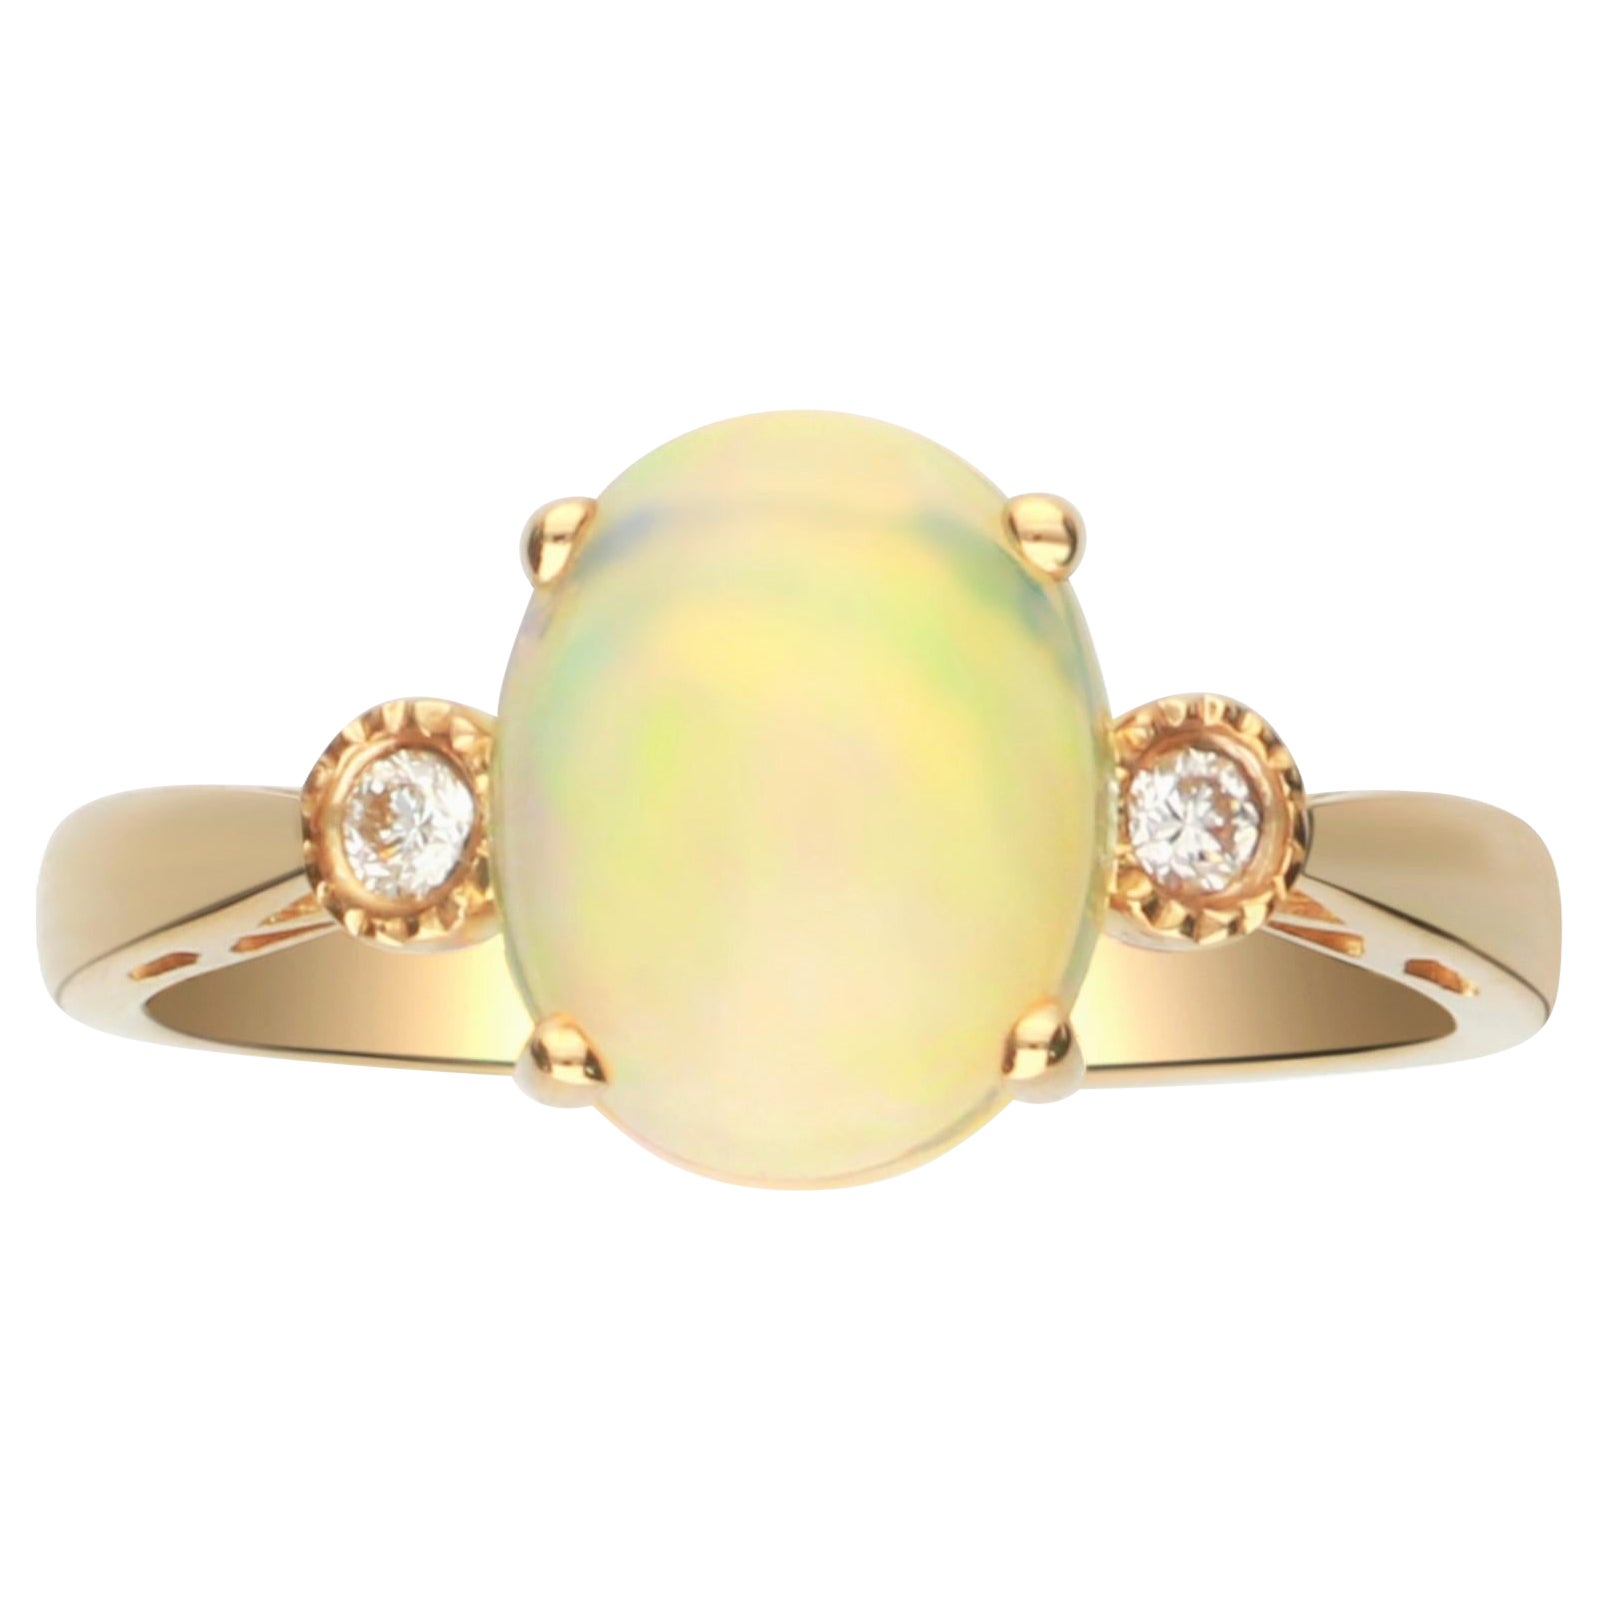 1.70 Carat Ethiopian Opal Oval Cab Diamond Accents 10K Yellow Gold Ring